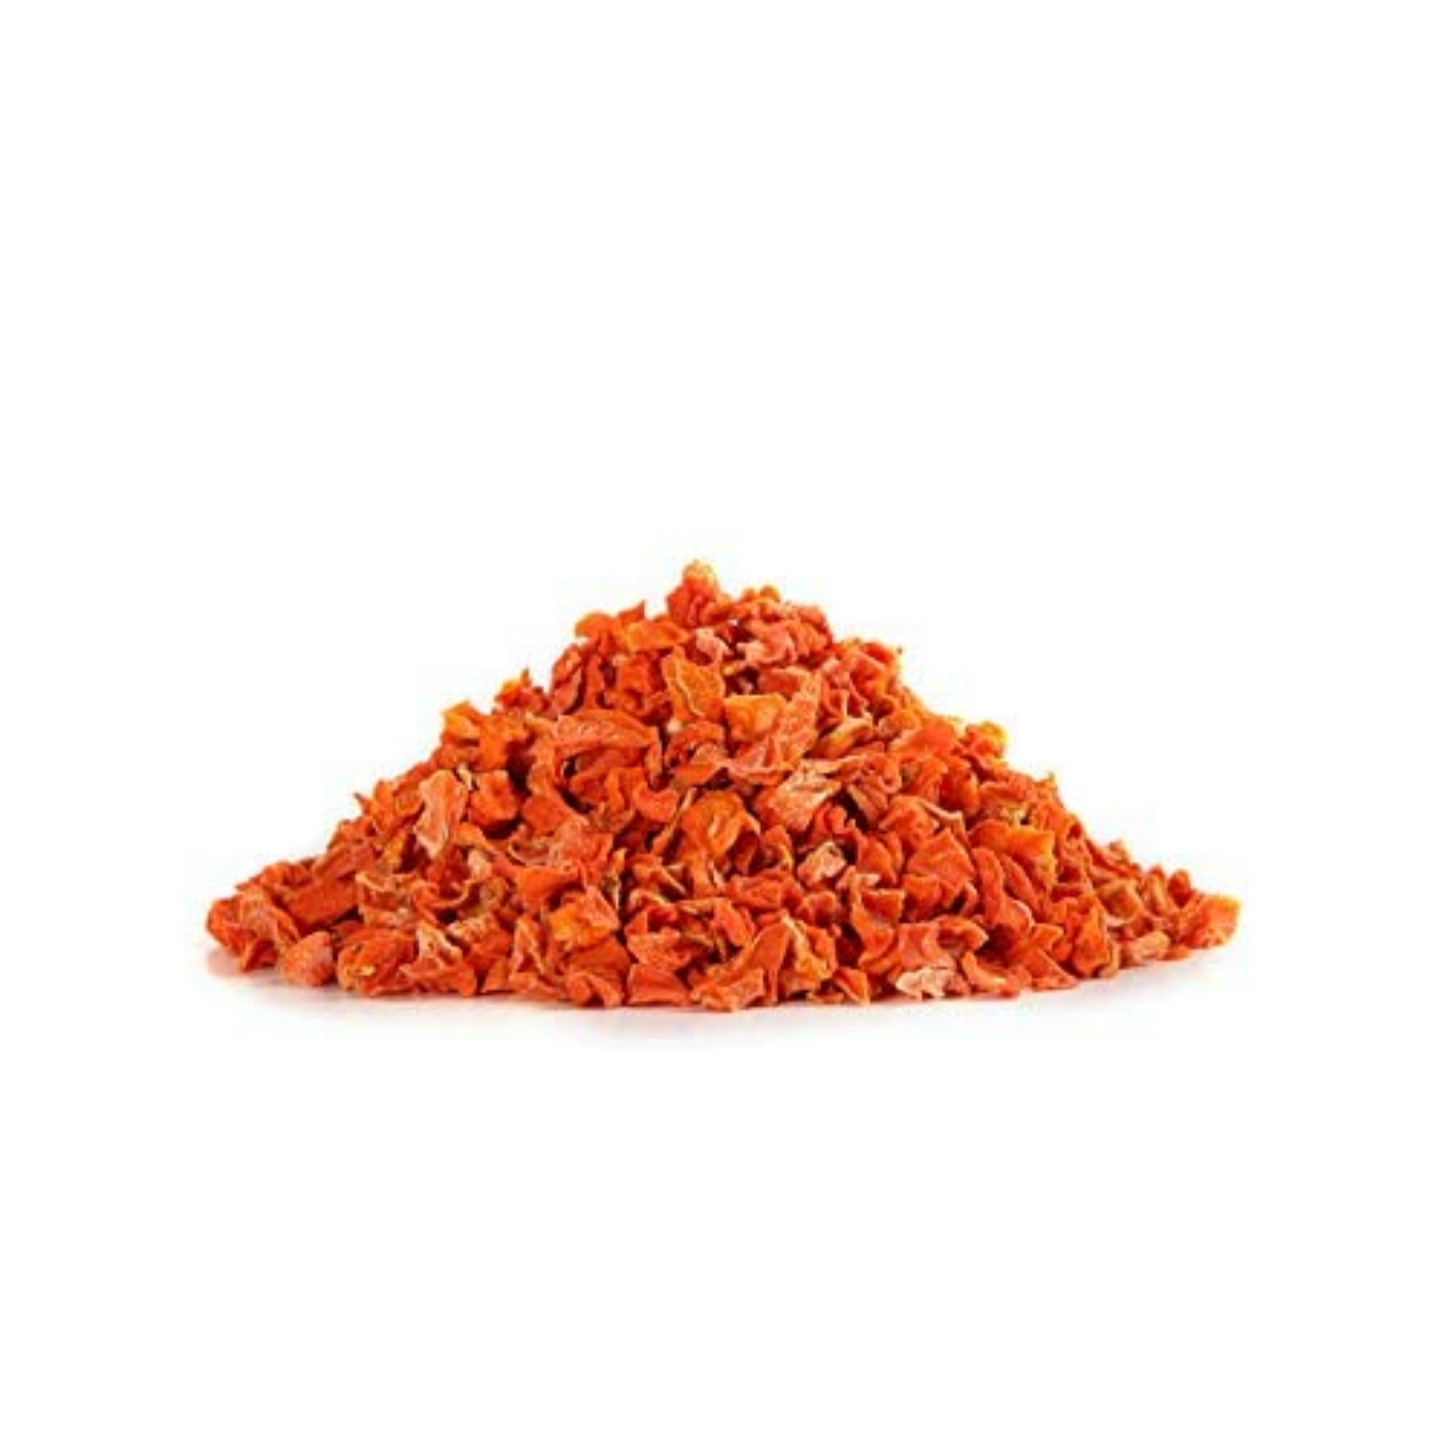 Gourmanity Dehydrated Carrot Flakes 2lb - Gourmanity